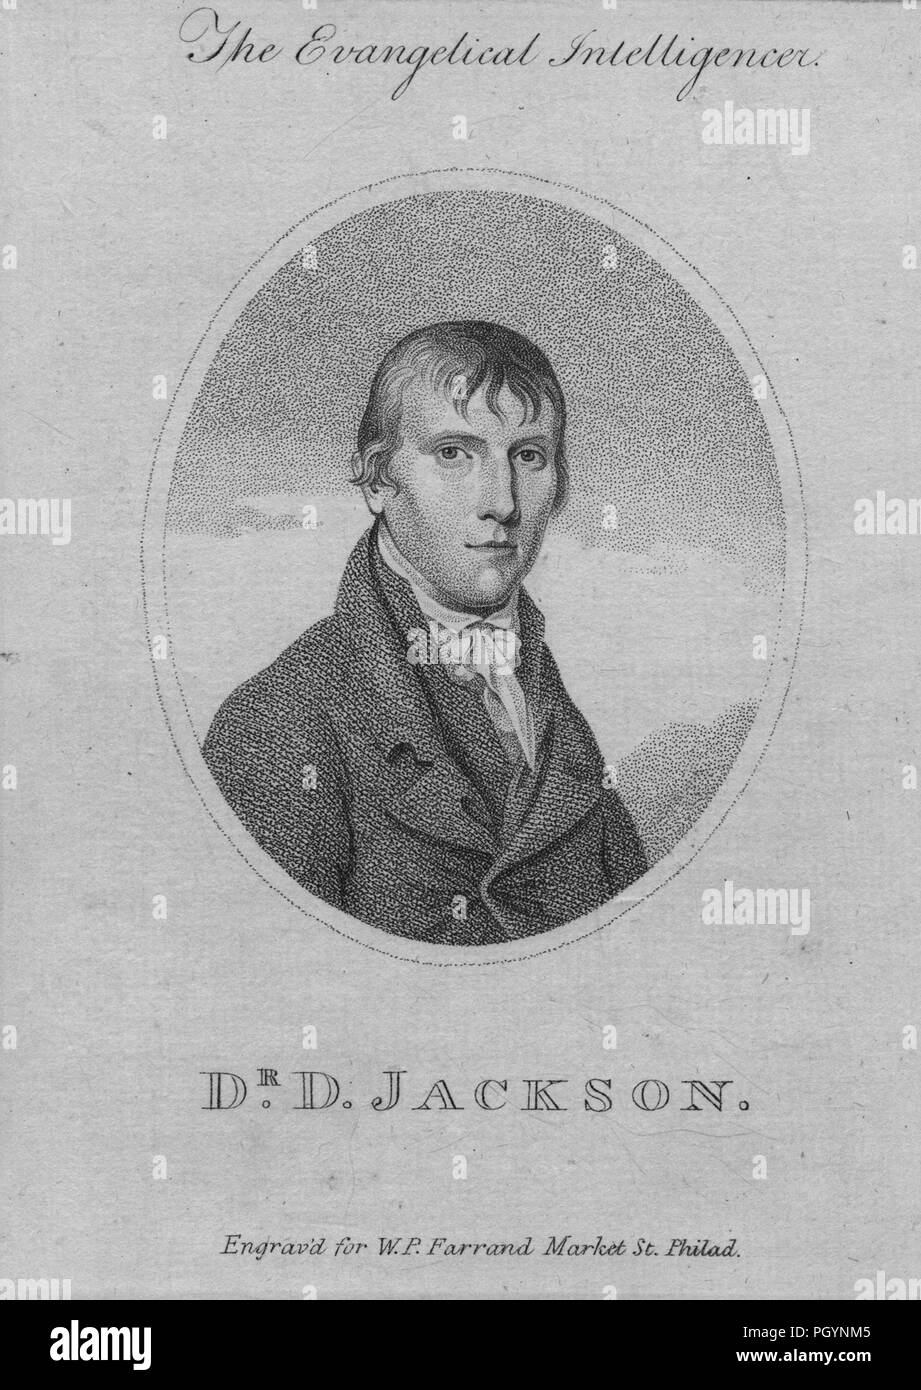 Black and white vintage print of Dr David Jackson, an apothecary, physician, and Continental Congress delegate from Pennsylvania, depicted from the chest up, facing the viewer, with a serious expression on his face, wearing a high-collared dark jacket, and a white ruffled ascot, engraved for WP Farrand, in Market Street, Philadelphia, Pennsylvania, USA, 1841. From the New York Public Library. () Stock Photo